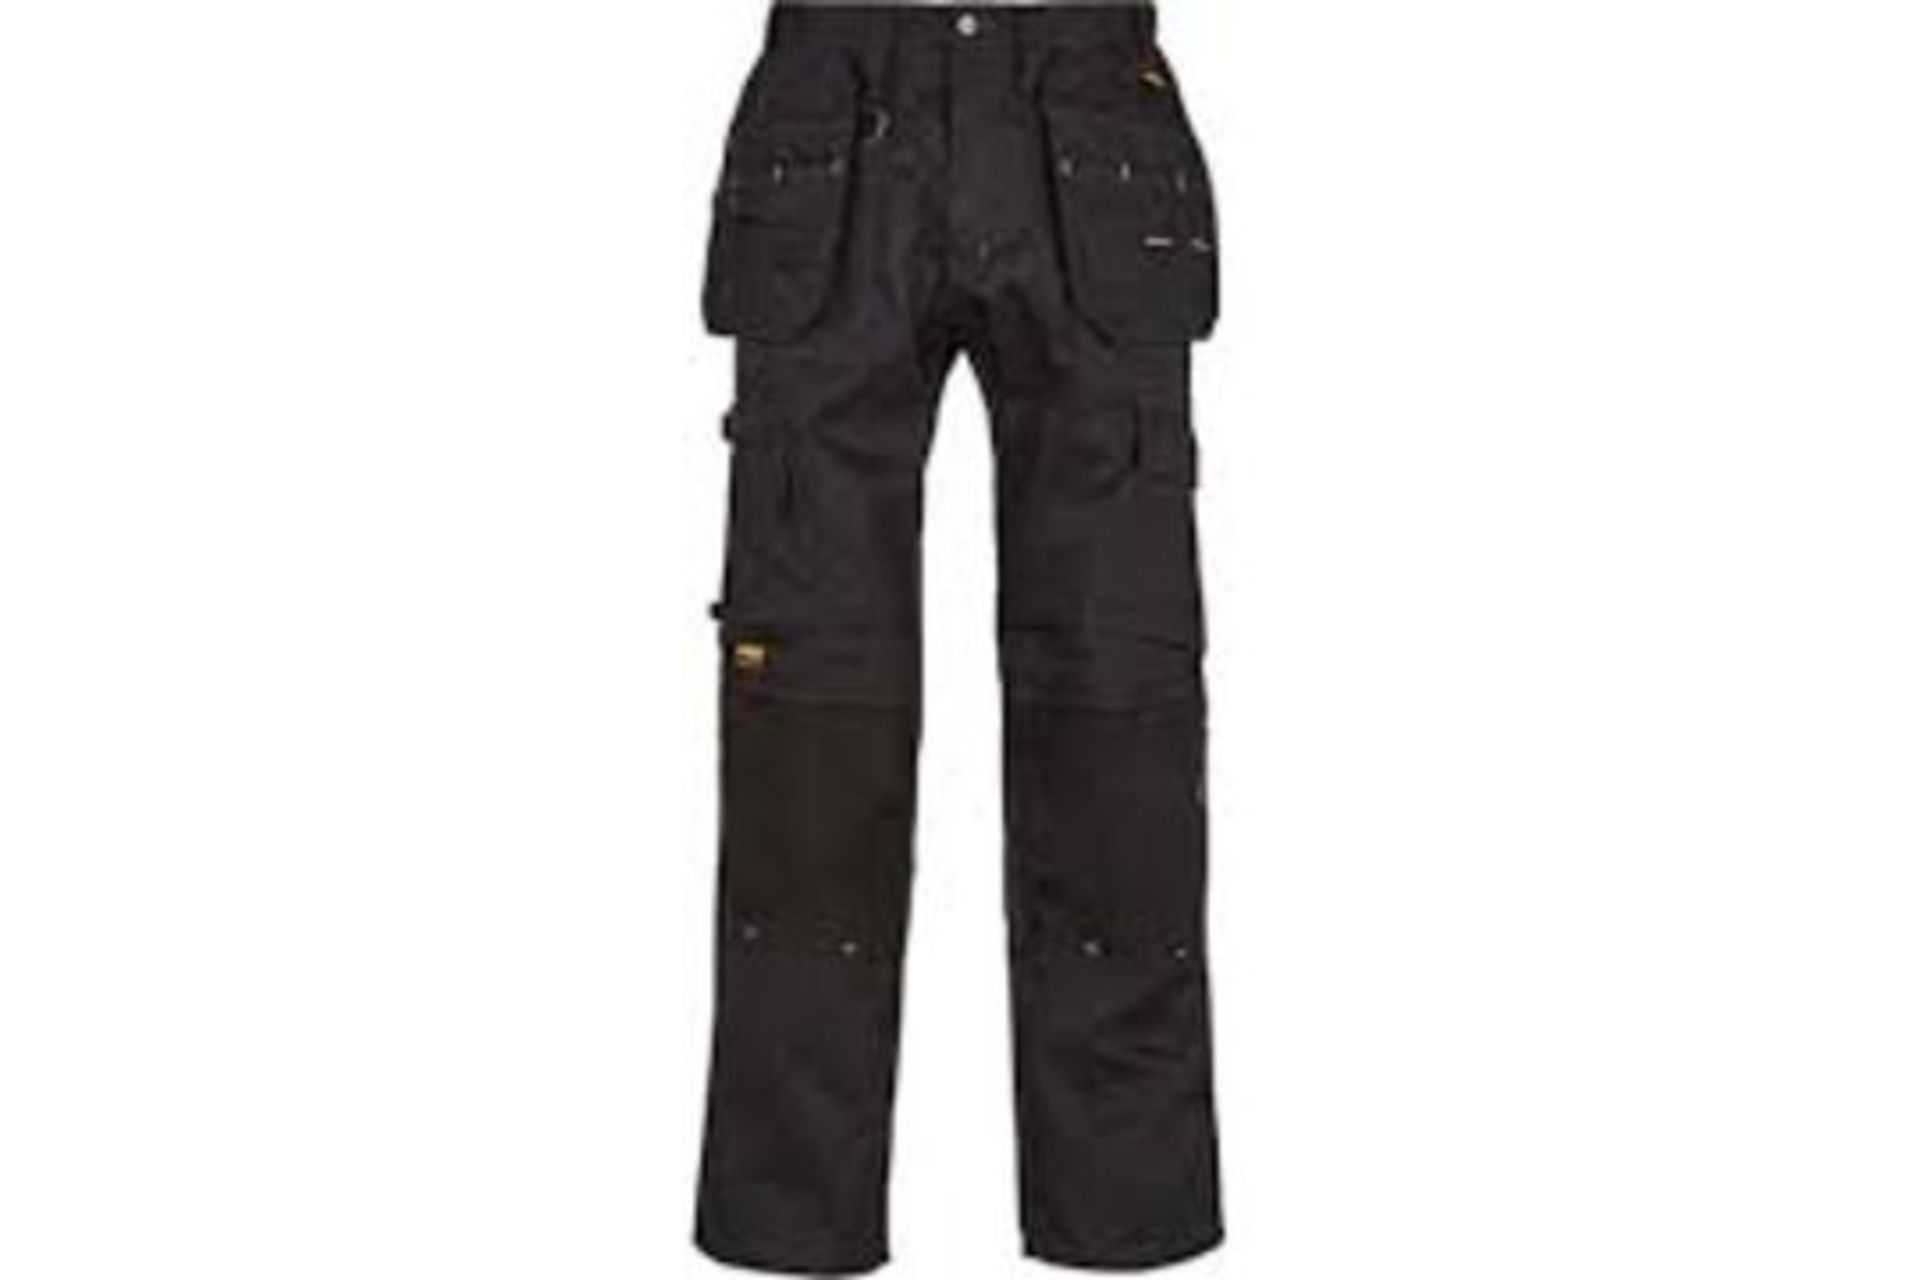 3 x NEW PACKAGED PAIRS OF DEWALT PRO TRADESMAN WORK TROUSERS. (ROW3)